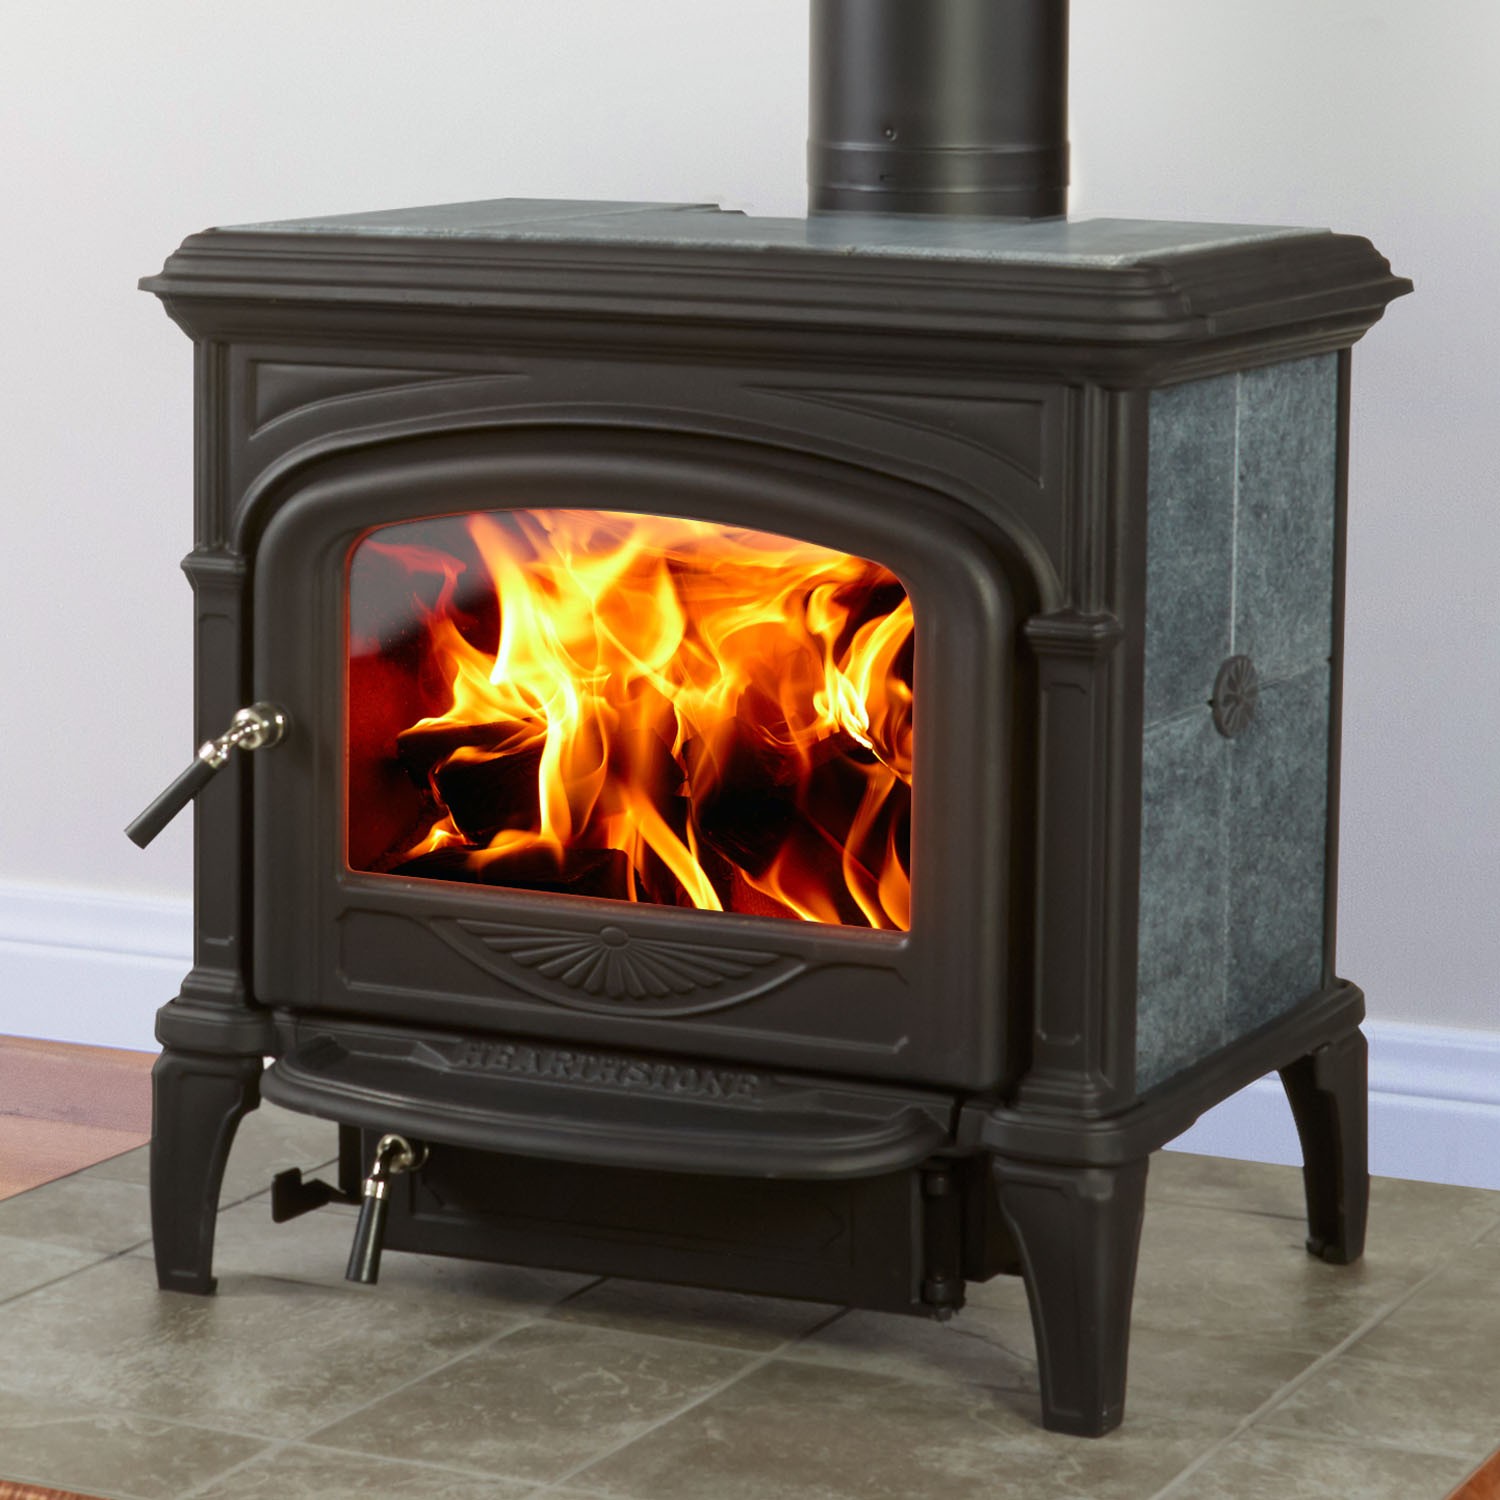 Phoenix 8612 Wood Stove - Iron and granite tile with door and handle.  Large flames going.  The flooring is sage green tile with a gray wall in the background.